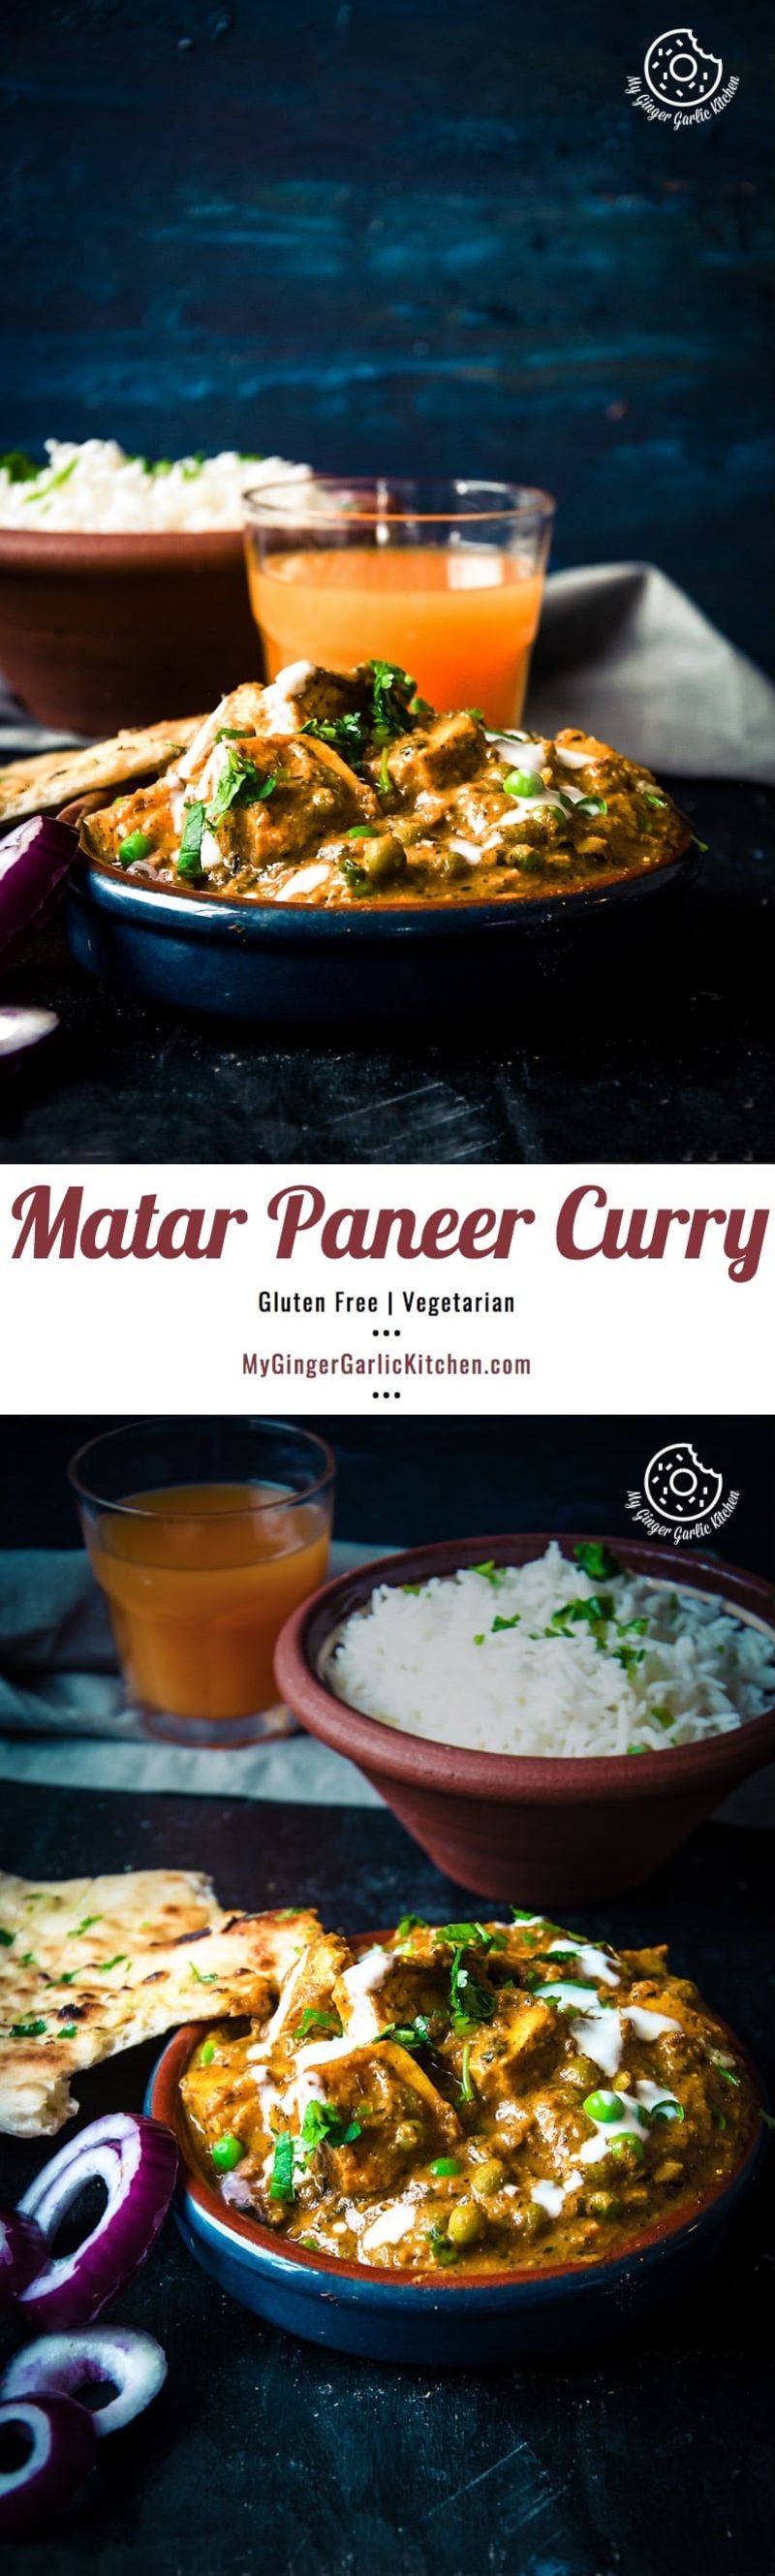 a close up of a plate of matar paneer curry with rice and vegetables